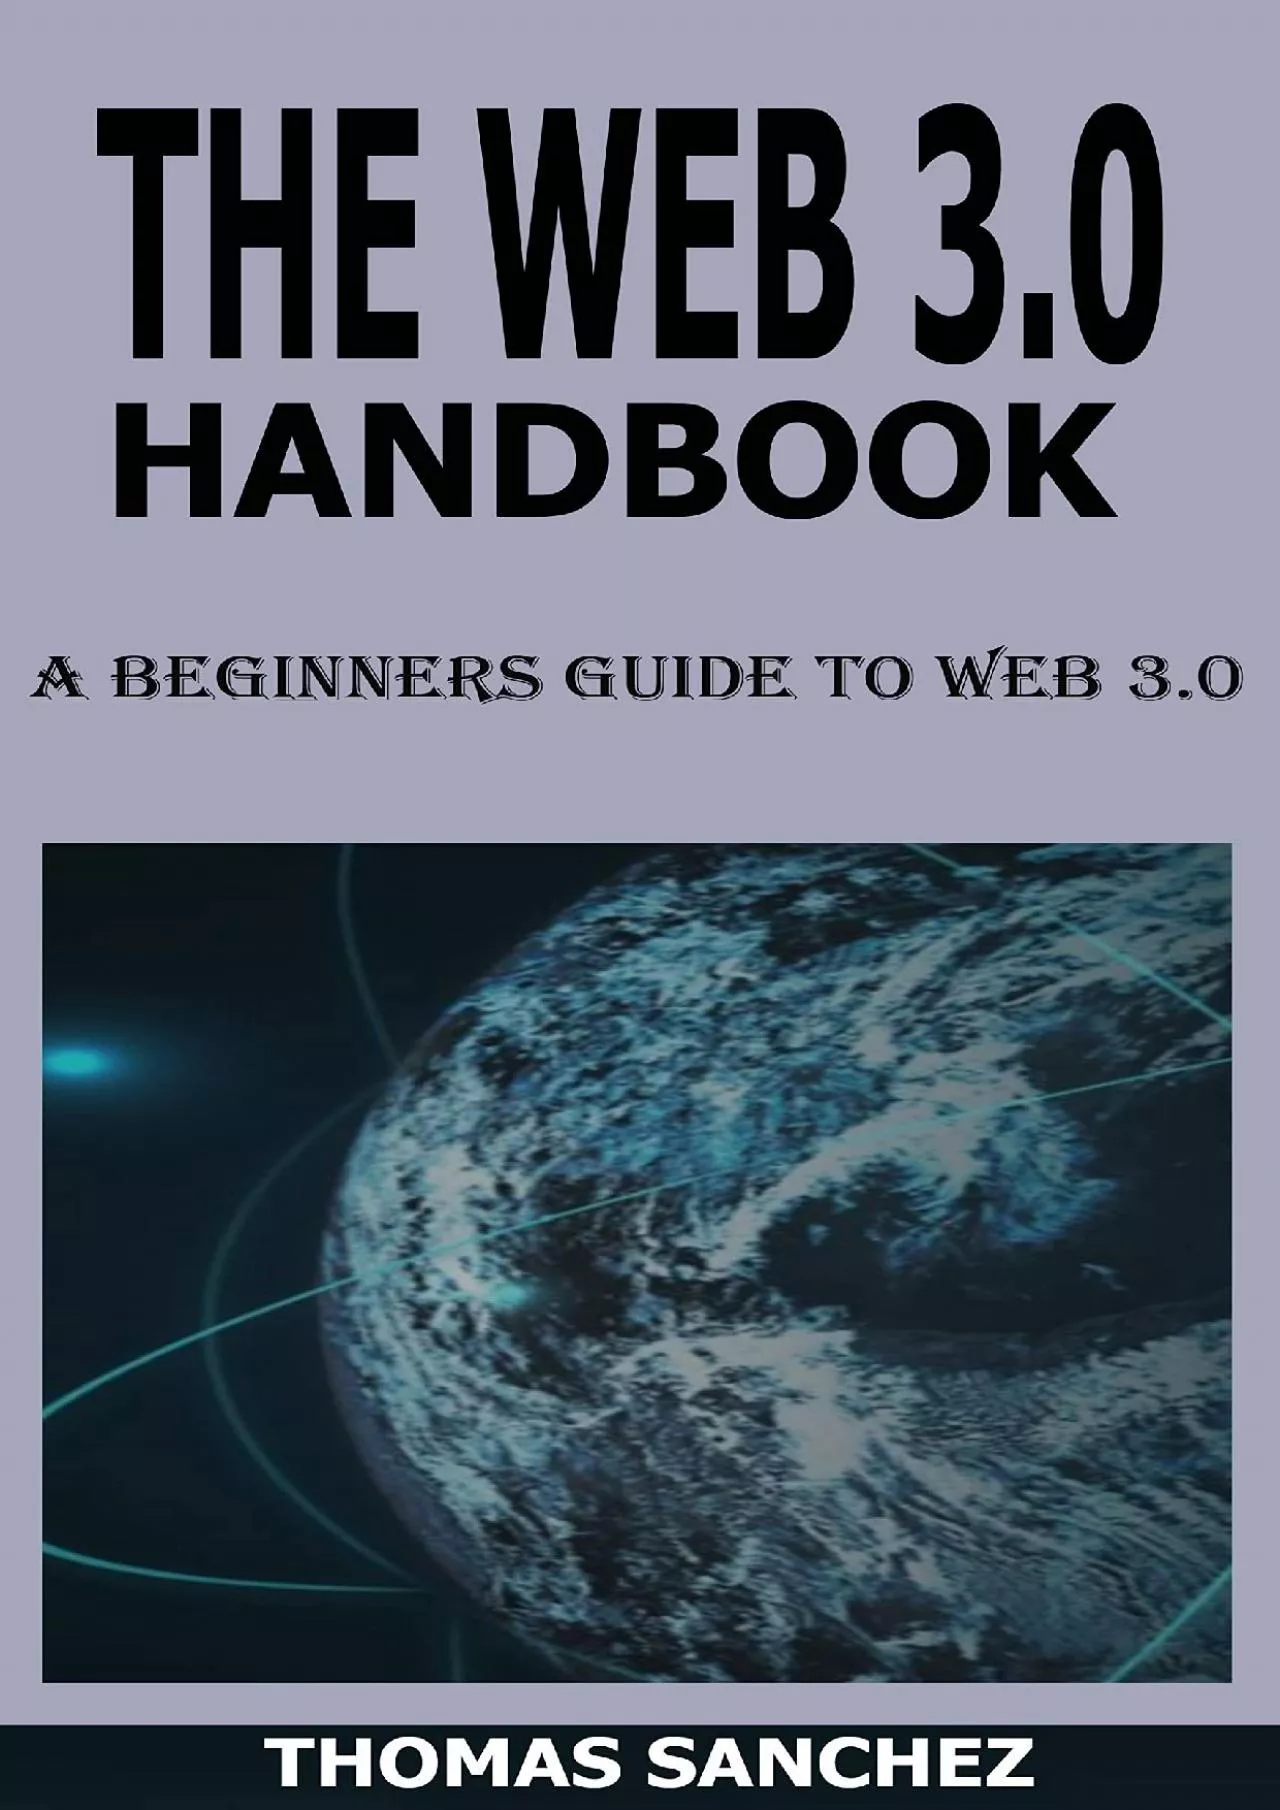 (EBOOK)-THE WEB 3.0 HANDBOOK: A Beginners Guide To Web 3.0 (Token Economy, Smart Contracts,